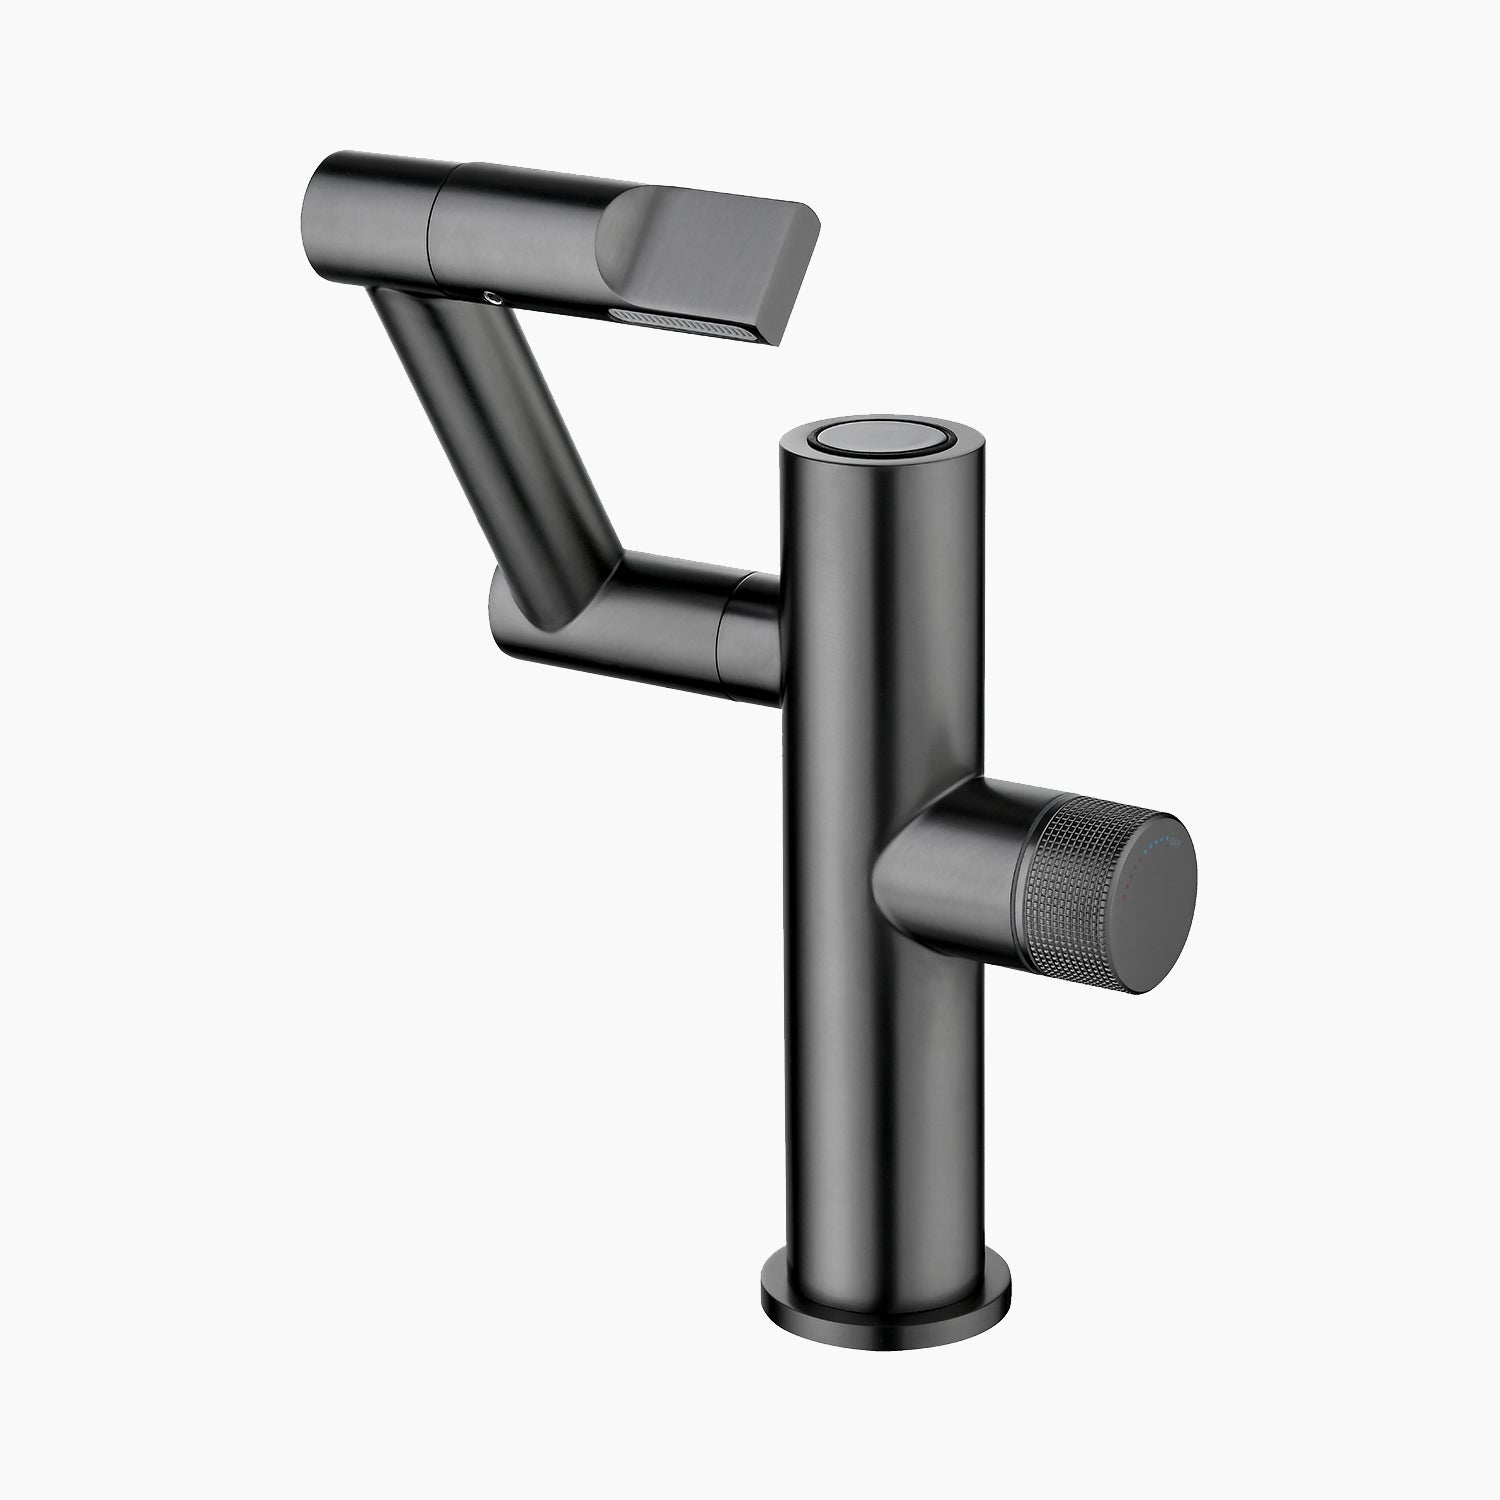 BF2201-2, Lefton Single-Hole Rotatable Faucet with Temperature Display